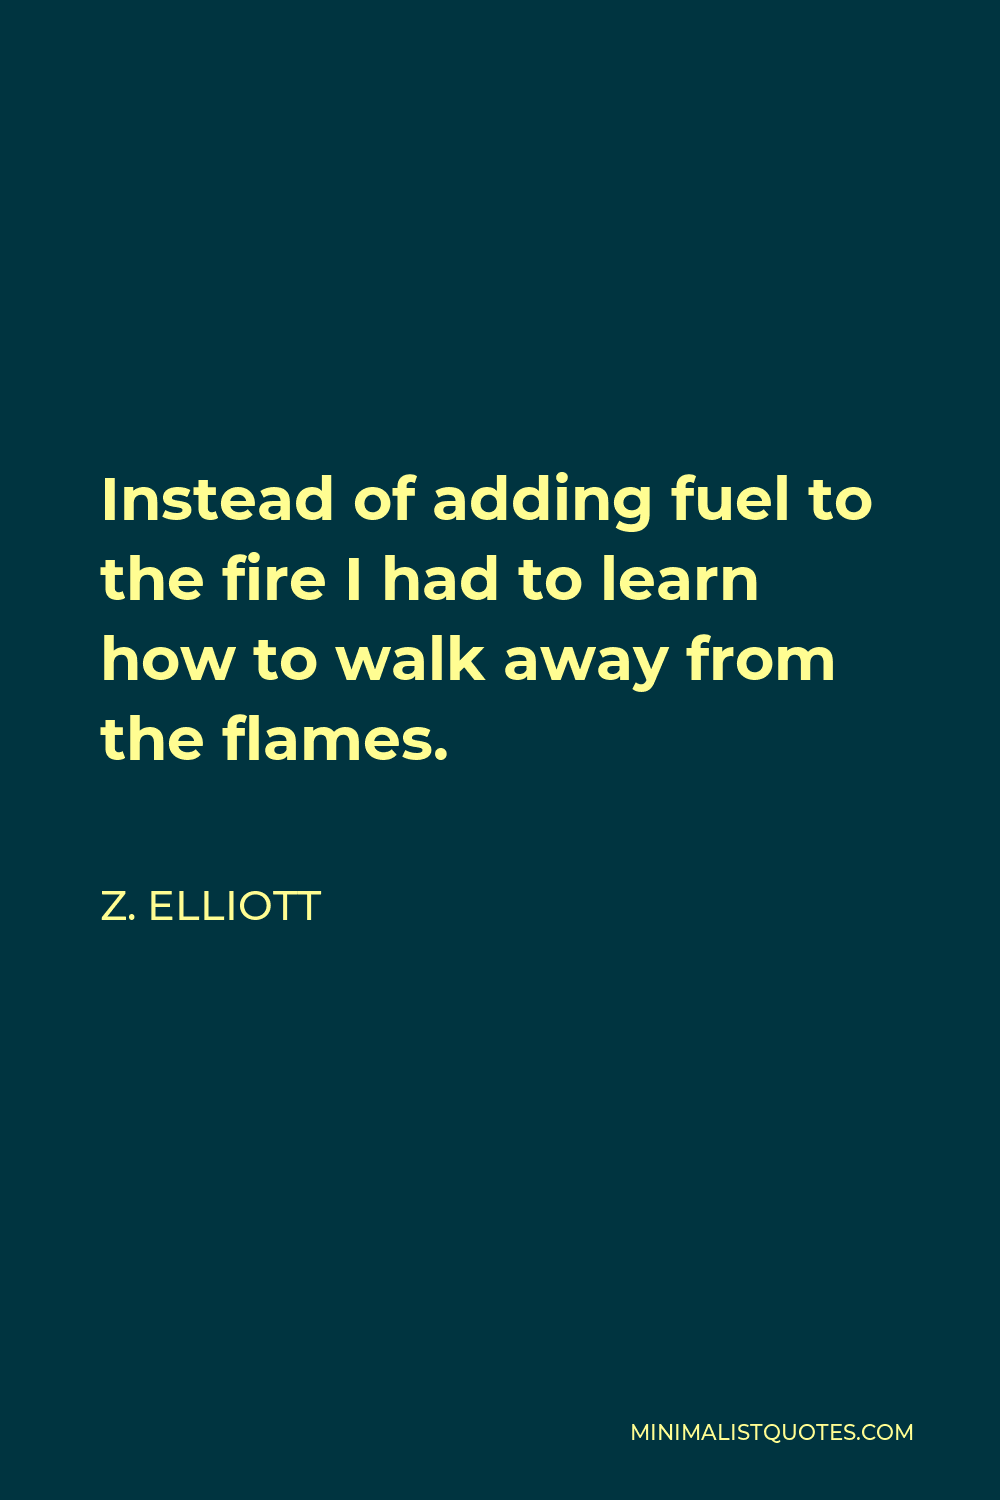 Don't add fuel to the fire! It's already burning!